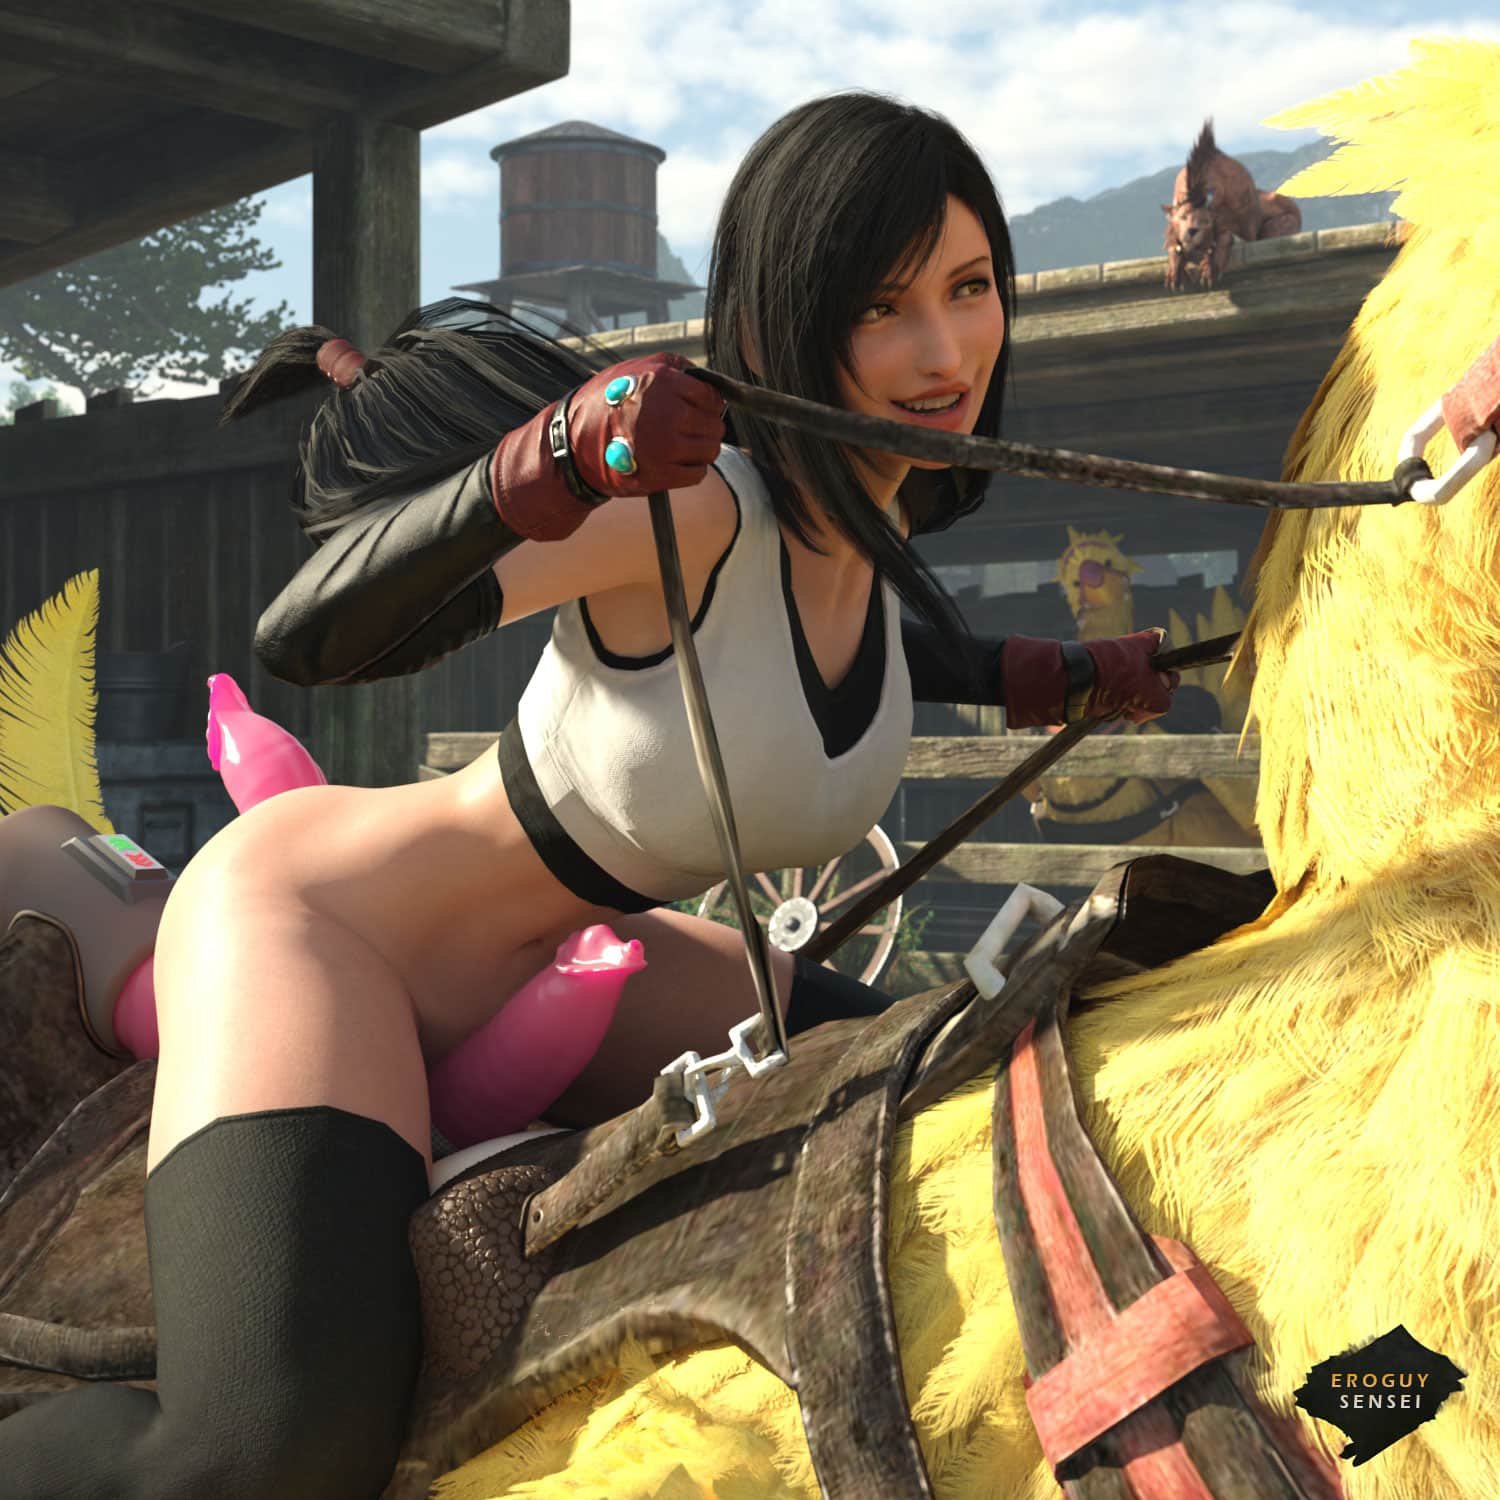 Tifa Lockhart riding a Chocobo using special saddle with attached dildos